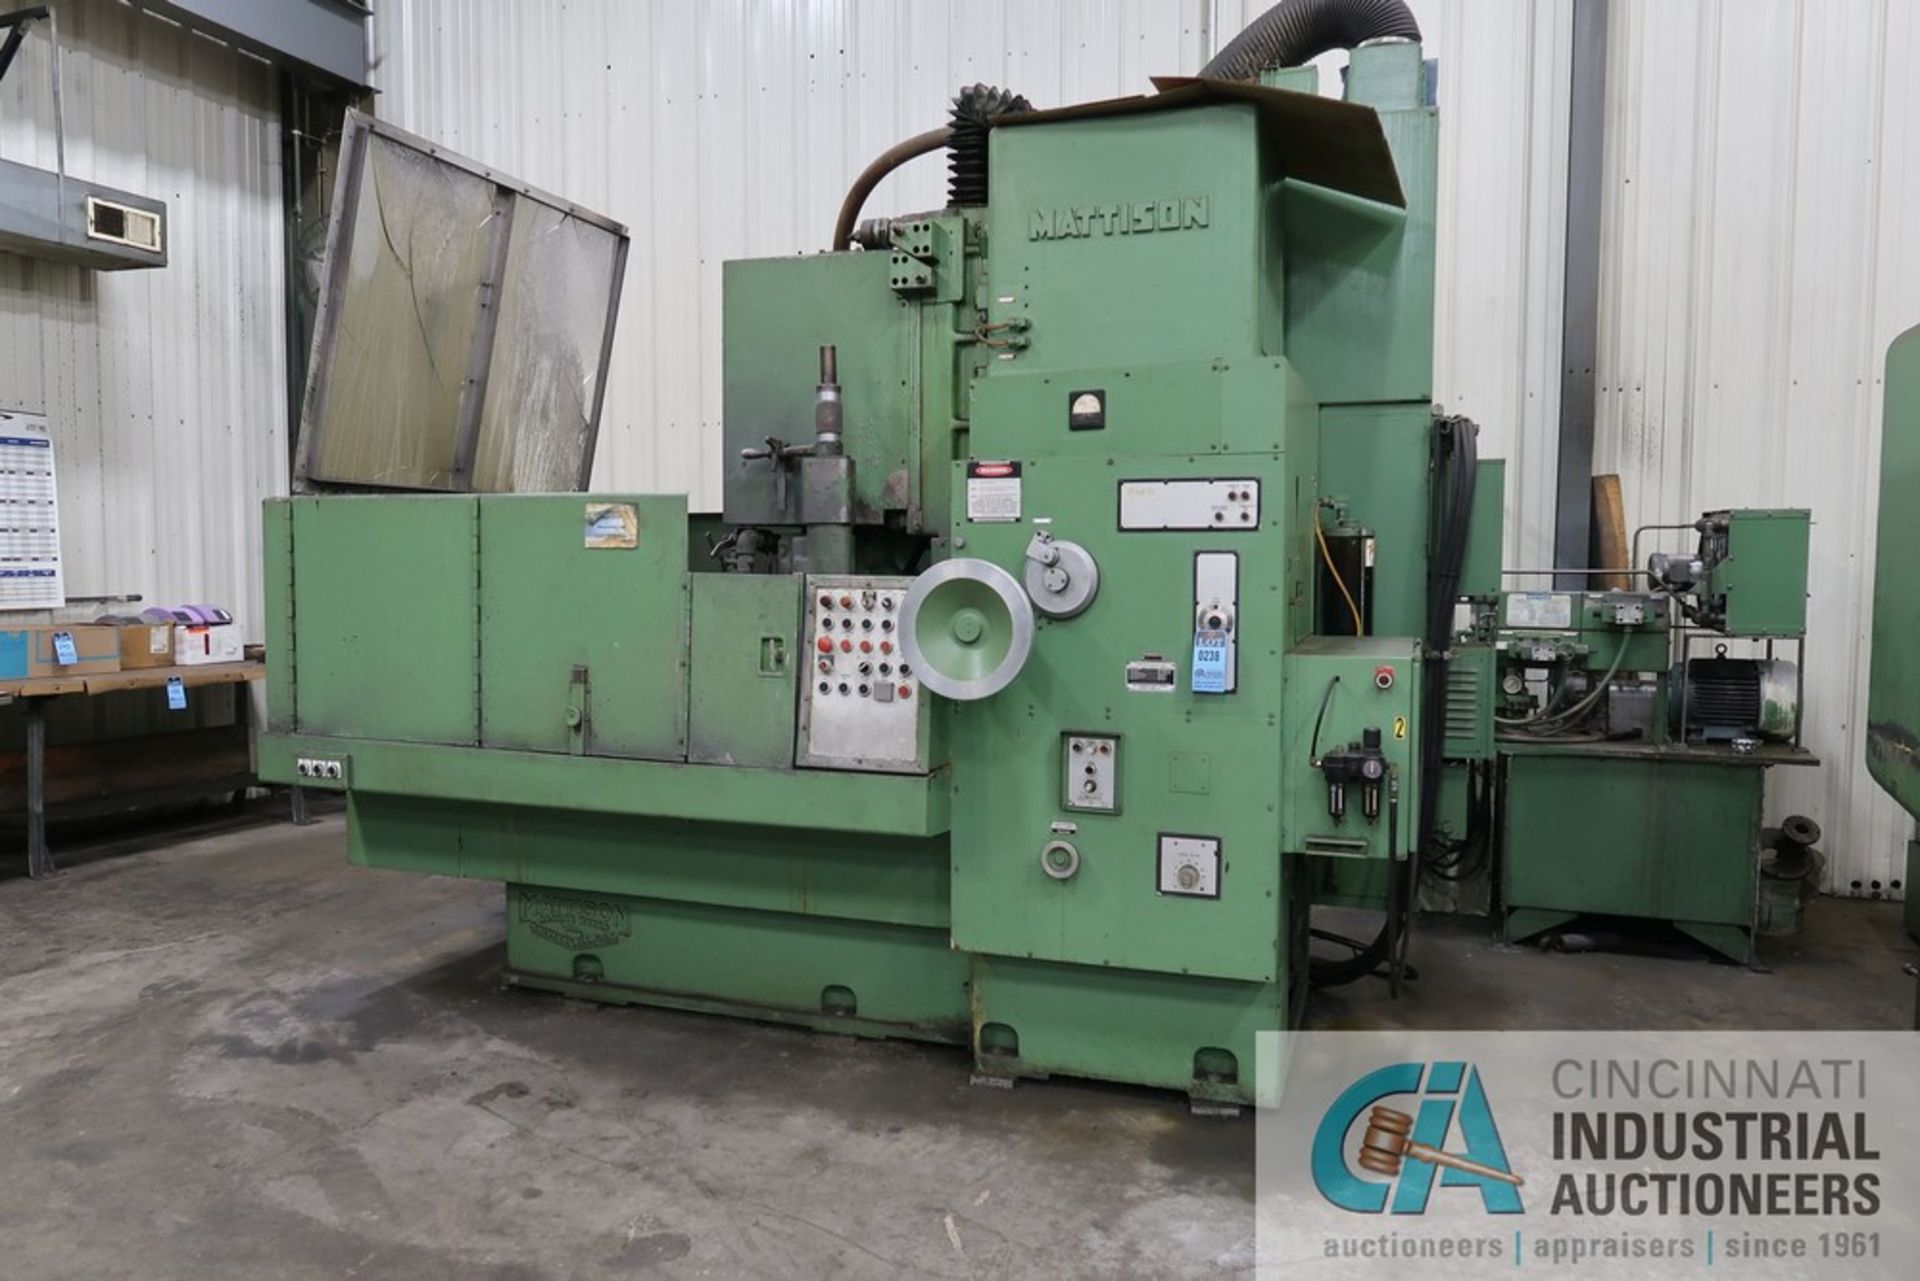 48" DIAMETER MATTISON ROTARY TABLE SURFACE GRINDER; S/N 24-799, 75 HP MOTOR, COOLANT FILTRATION, - Image 2 of 16